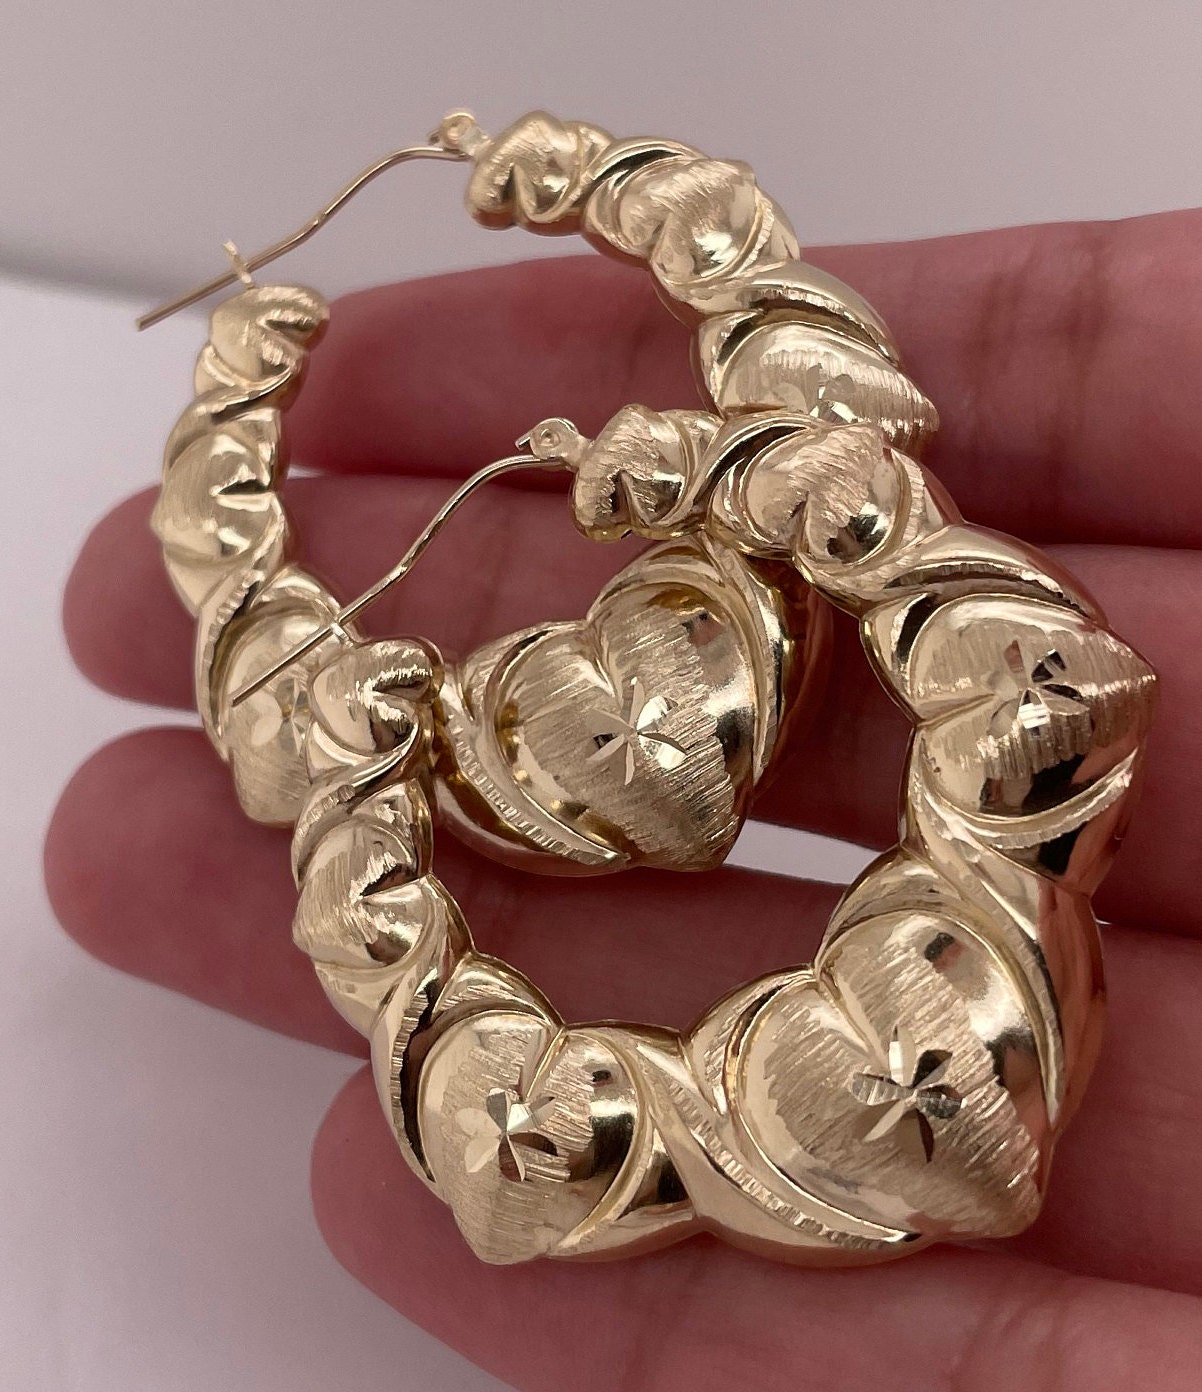 10K YELLOW GOLD HEART BAMBOO HOOPS -LARGE